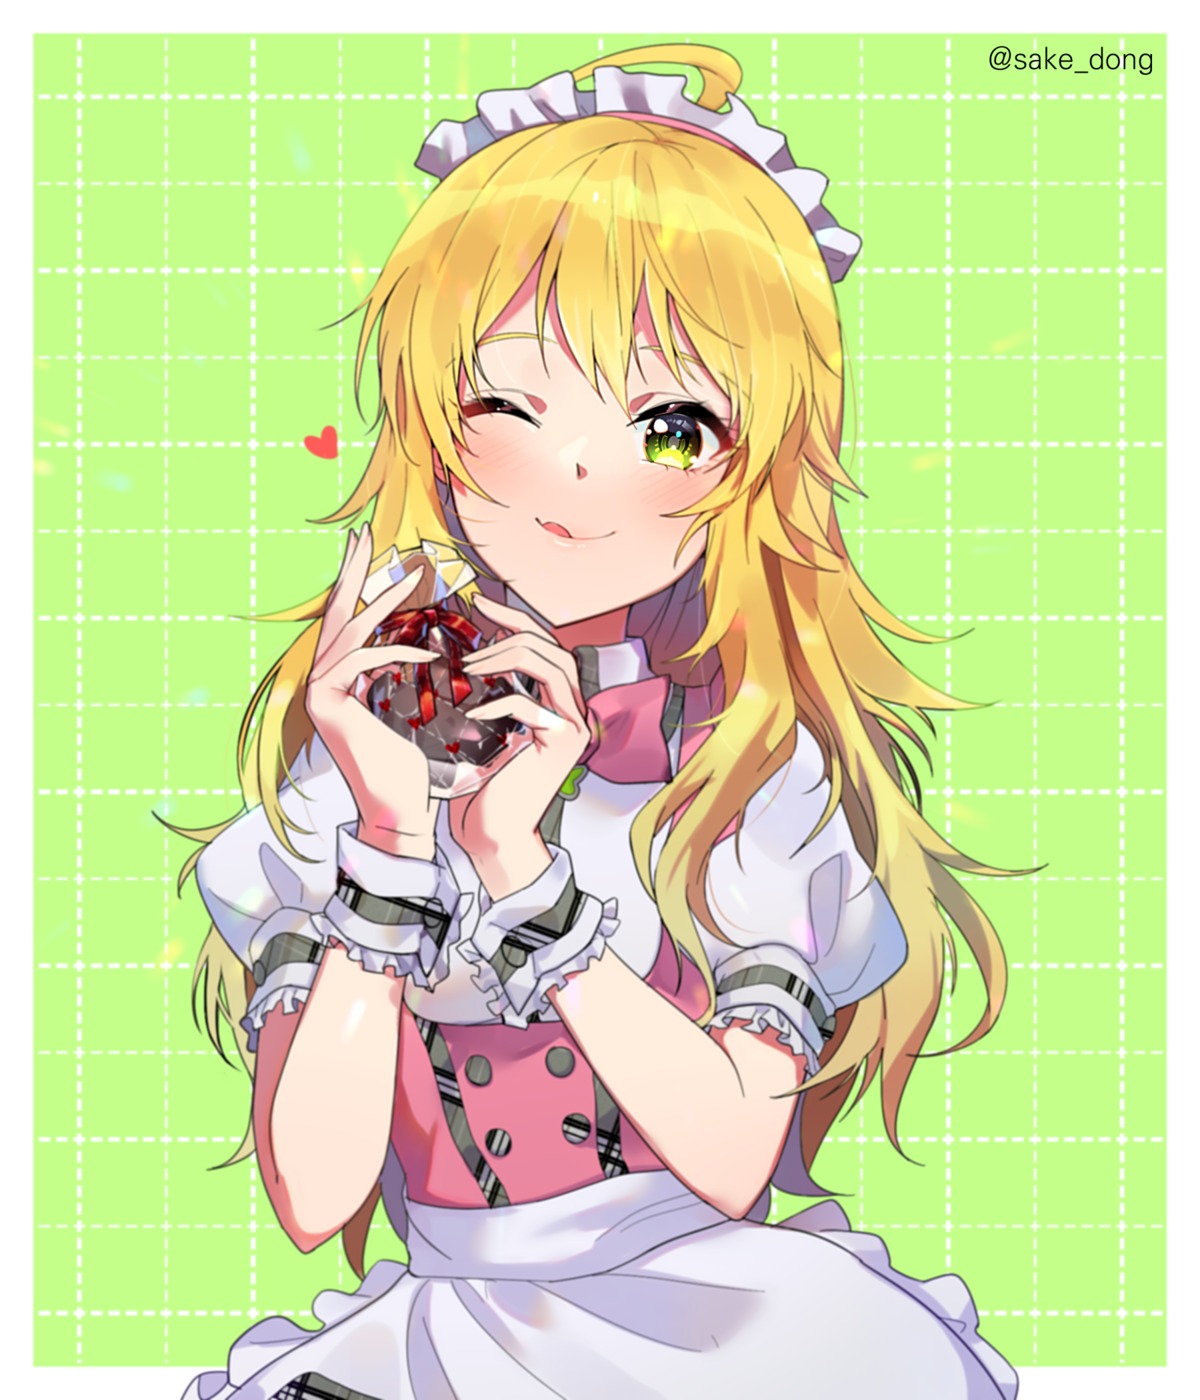 hoshii_miki maid sake_dong the_idolm@ster the_idolm@ster_million_live! the_idolm@ster_million_live!_theater_days